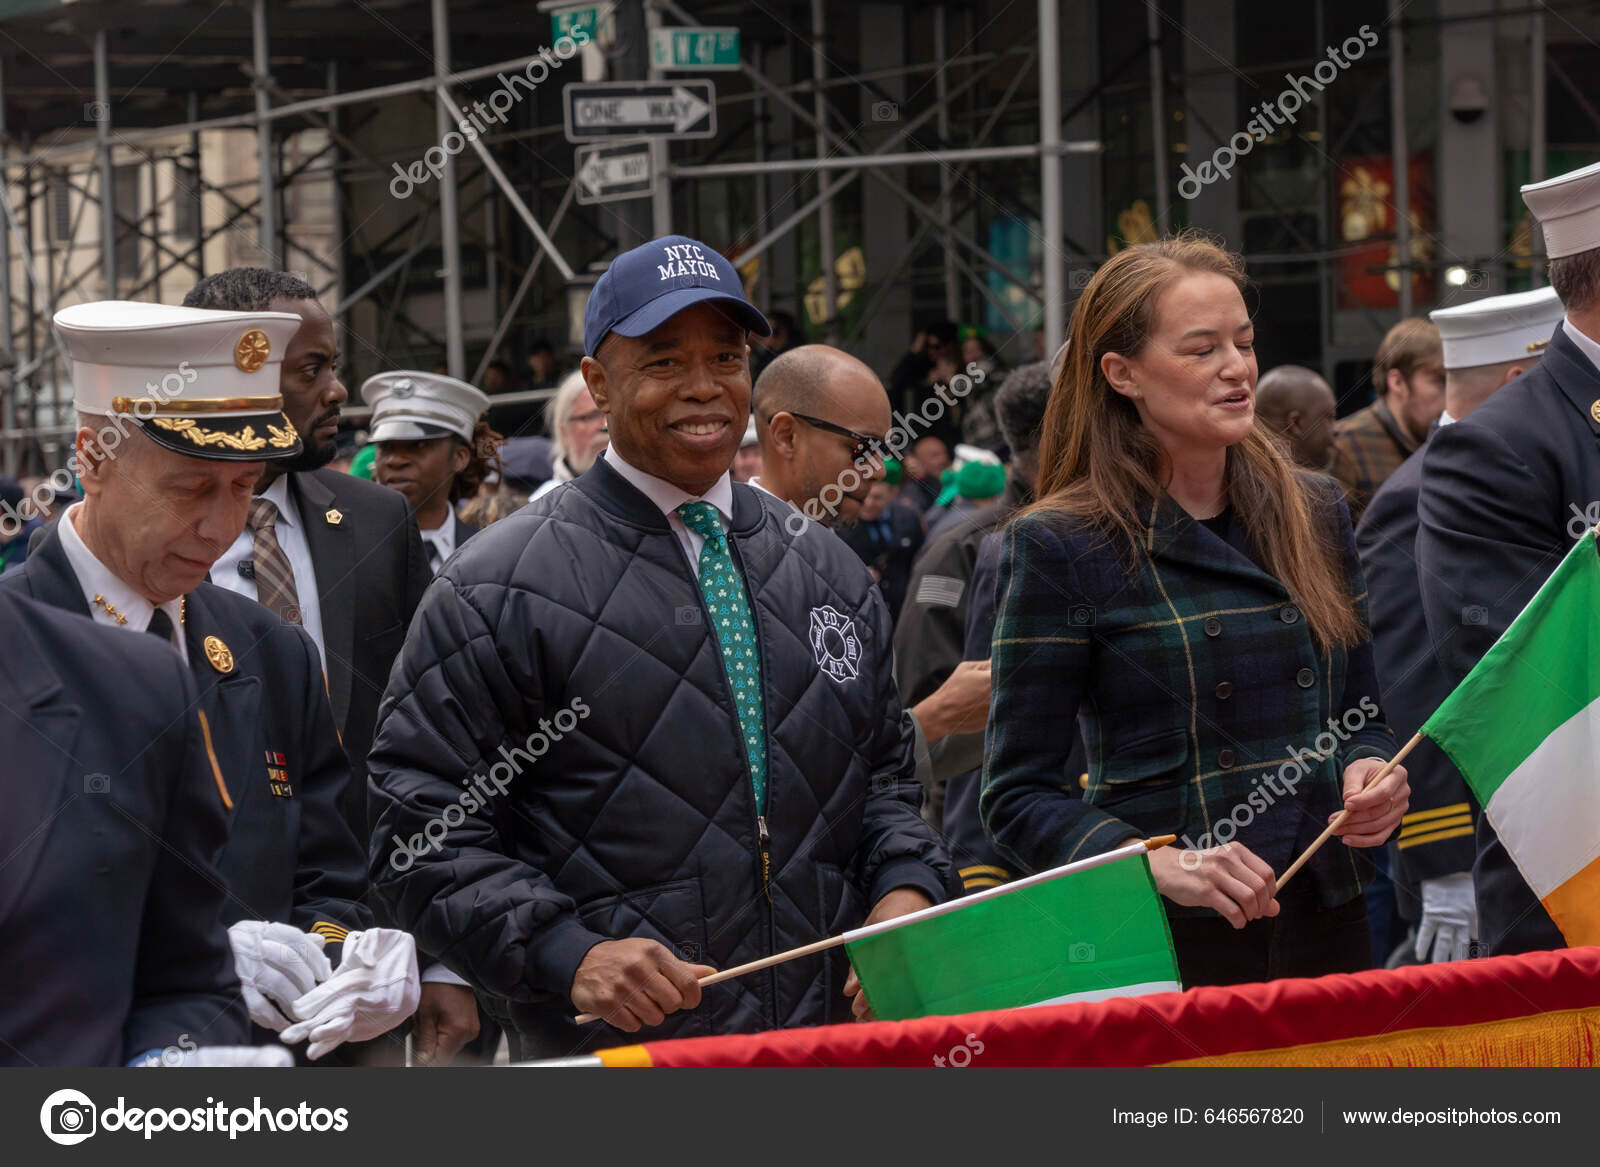 St. Patrick's Day Parade 2023 in New York - Dates